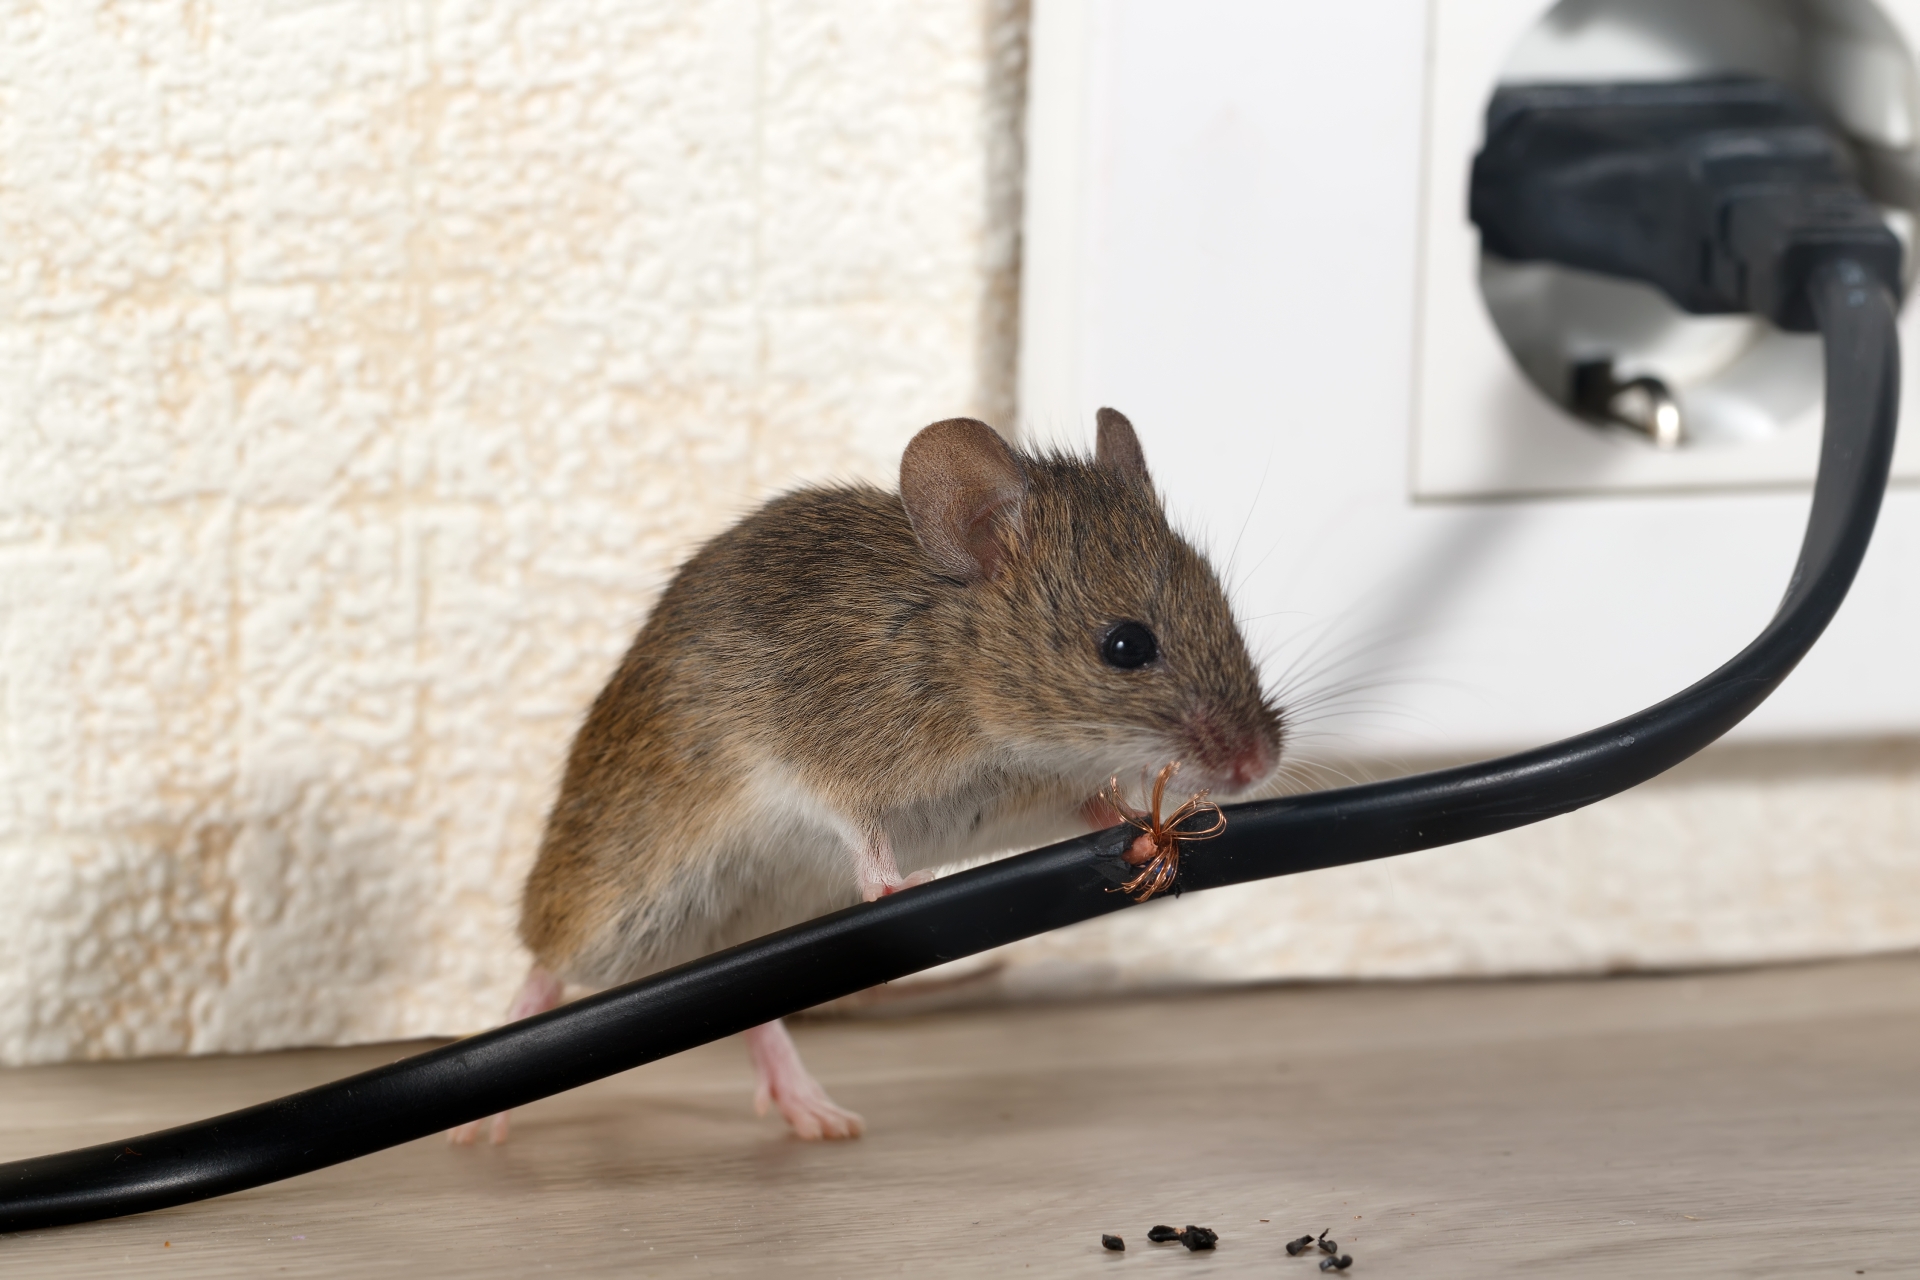 Mice Infestation, Pest Control in Hampstead, NW3 . Call Now 020 8166 9746